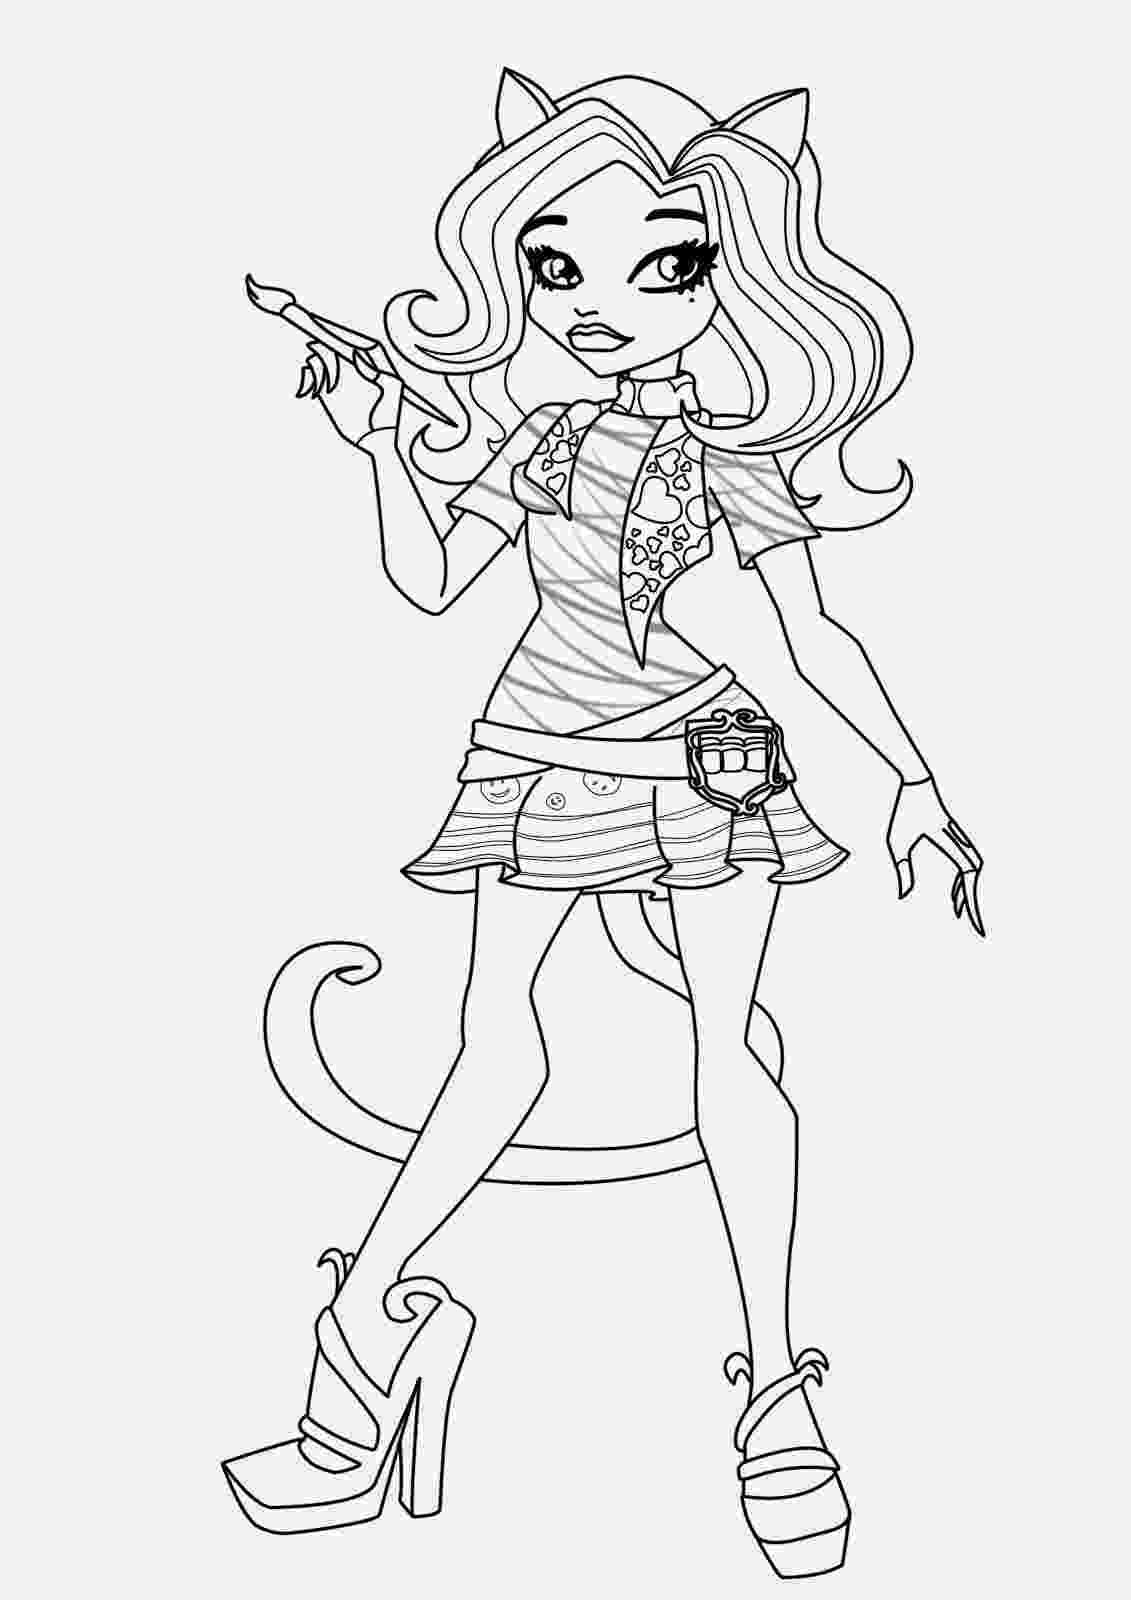 printable monster high pictures free printable monster high coloring pages coloring pages pictures monster printable high 